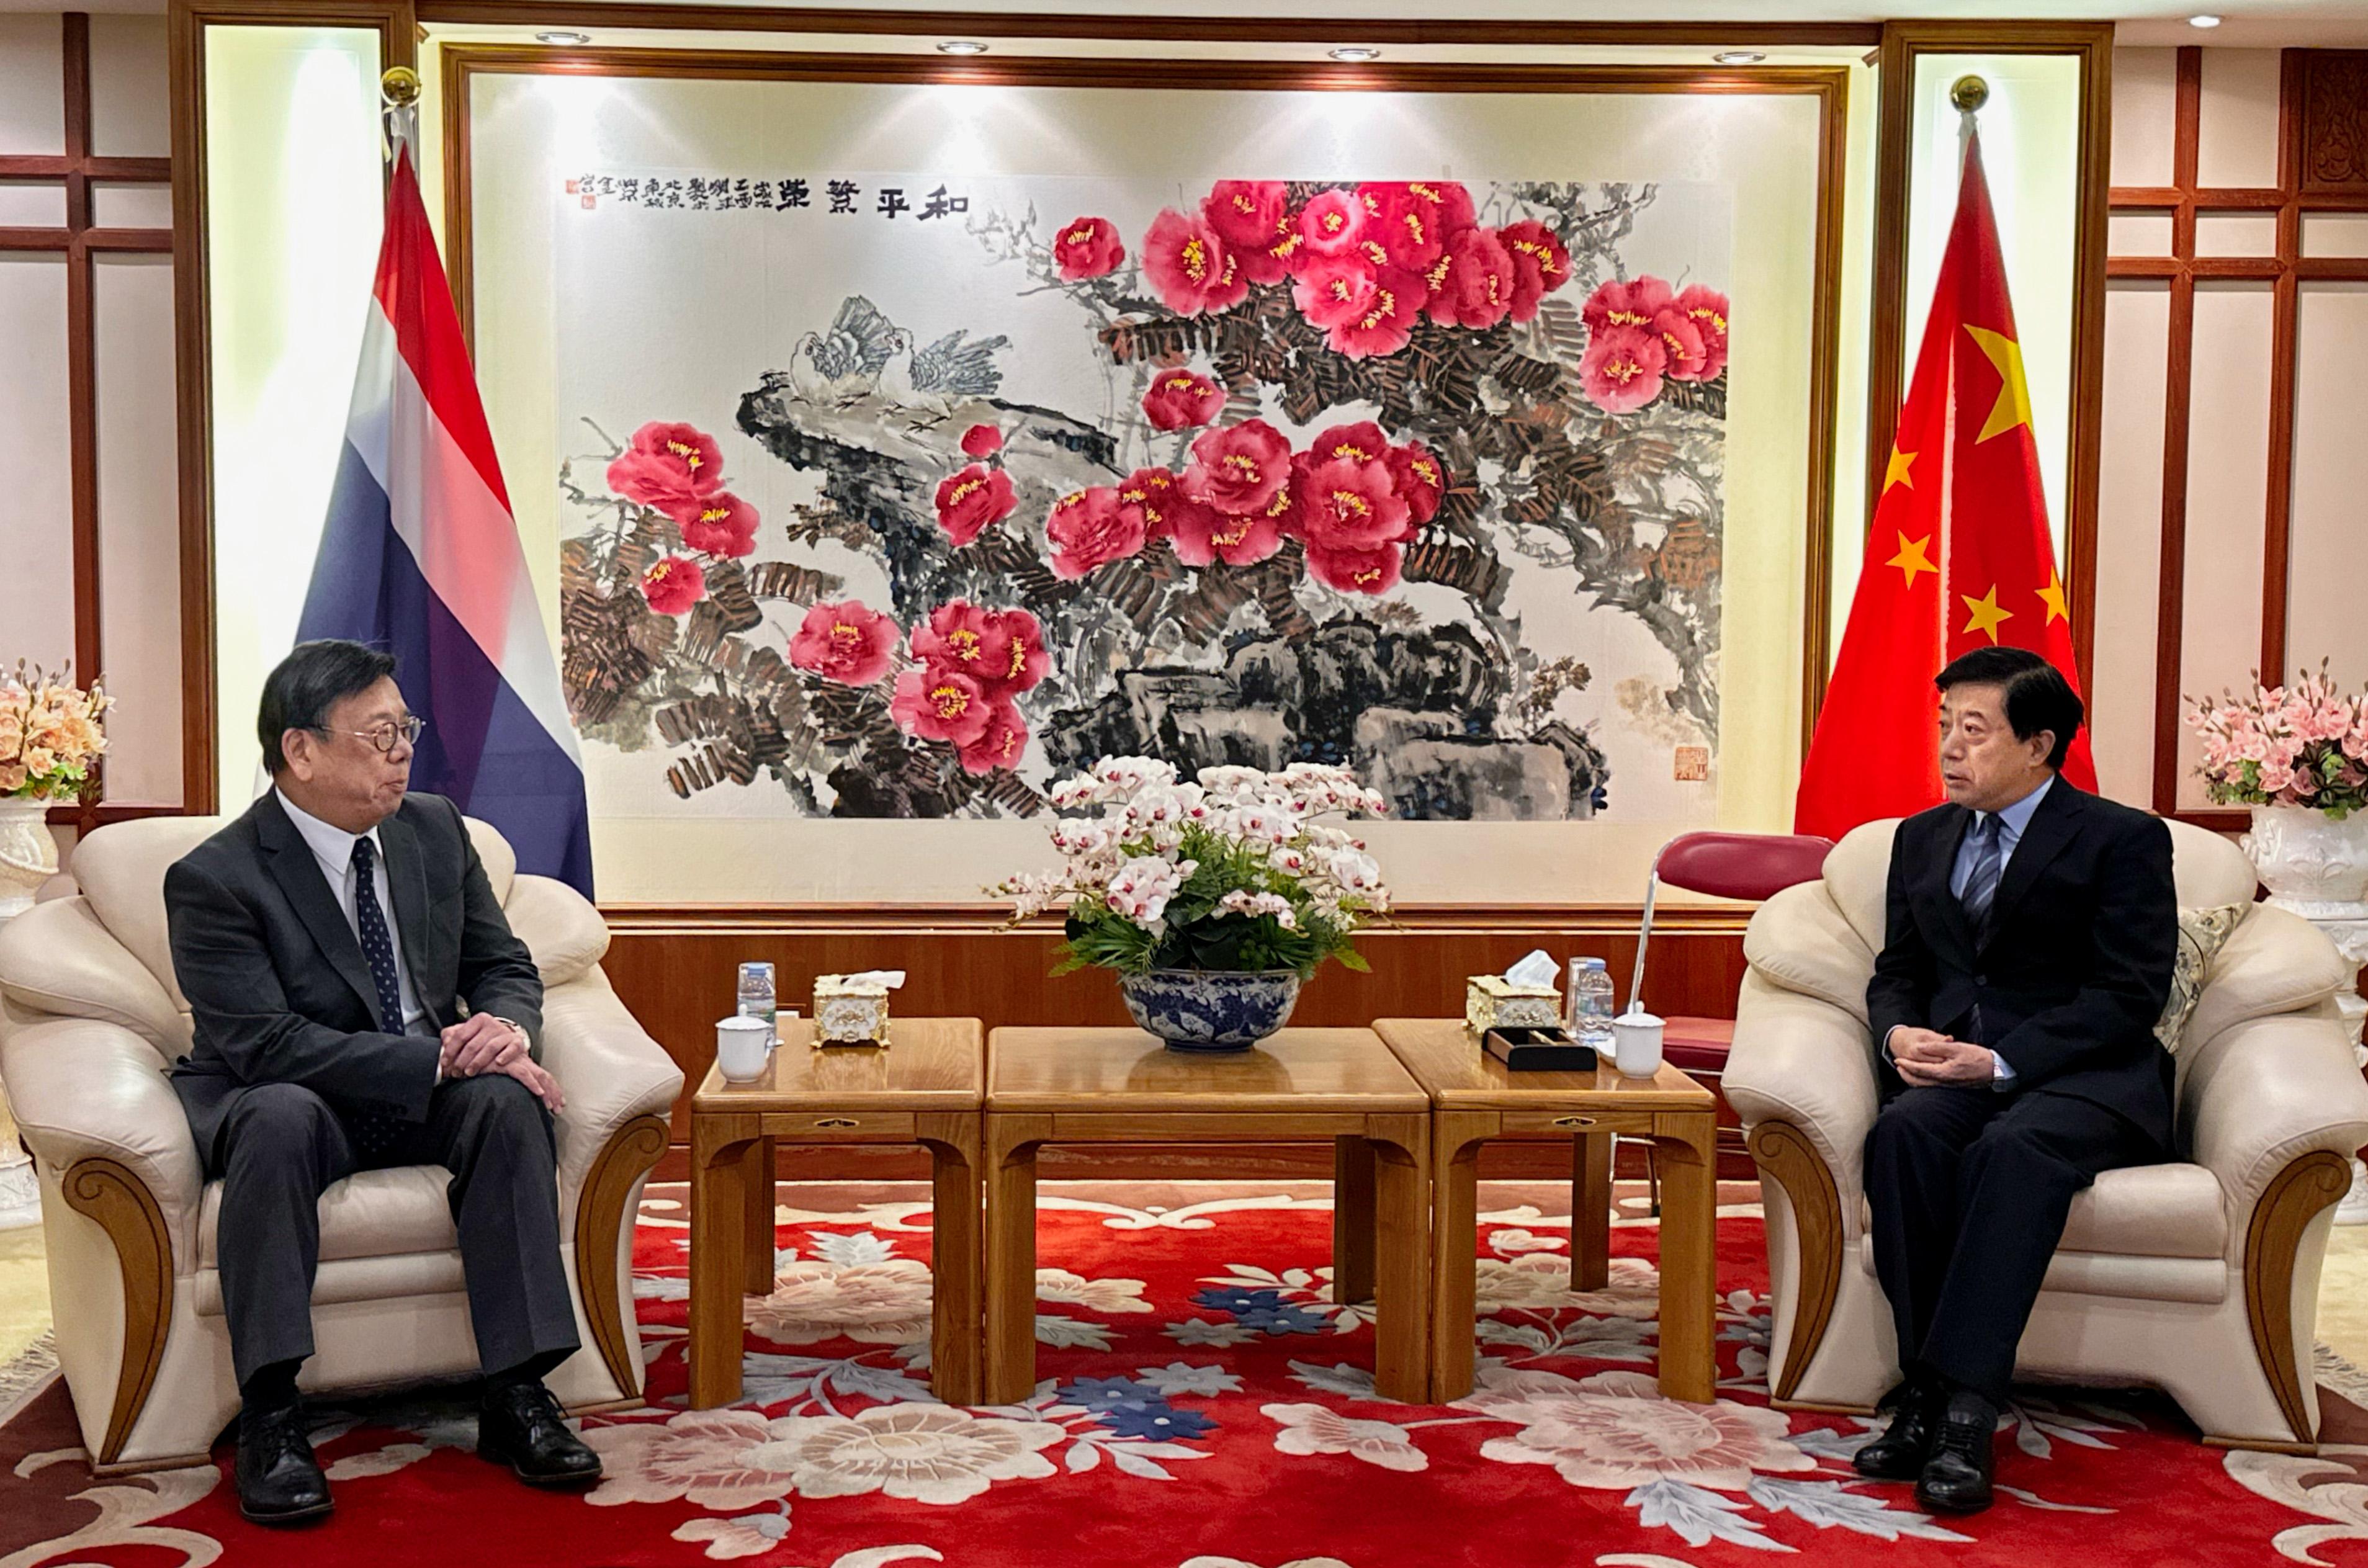 The Secretary for Commerce and Economic Development, Mr Algernon Yau (left), pays a courtesy call on the Chinese Ambassador to Thailand, Mr Han Zhiqiang (right), in Bangkok, Thailand, today (July 13).